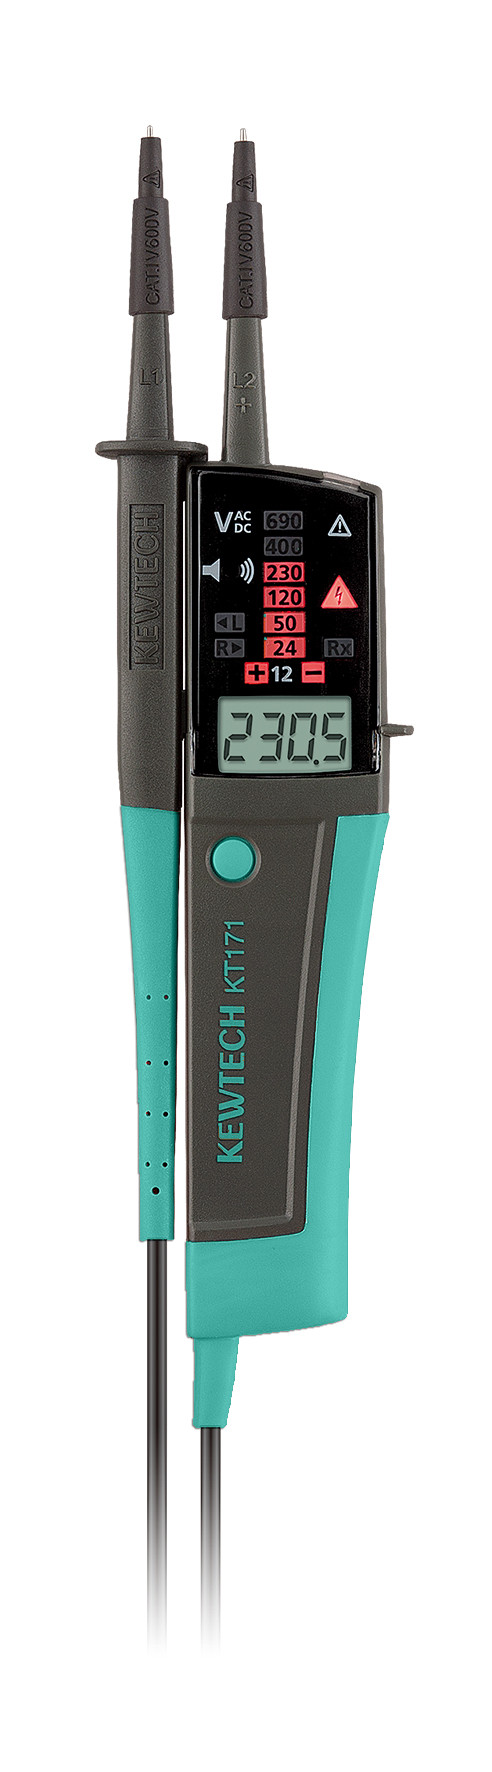 KewTech KT171 Voltage Tester - Click Image to Close